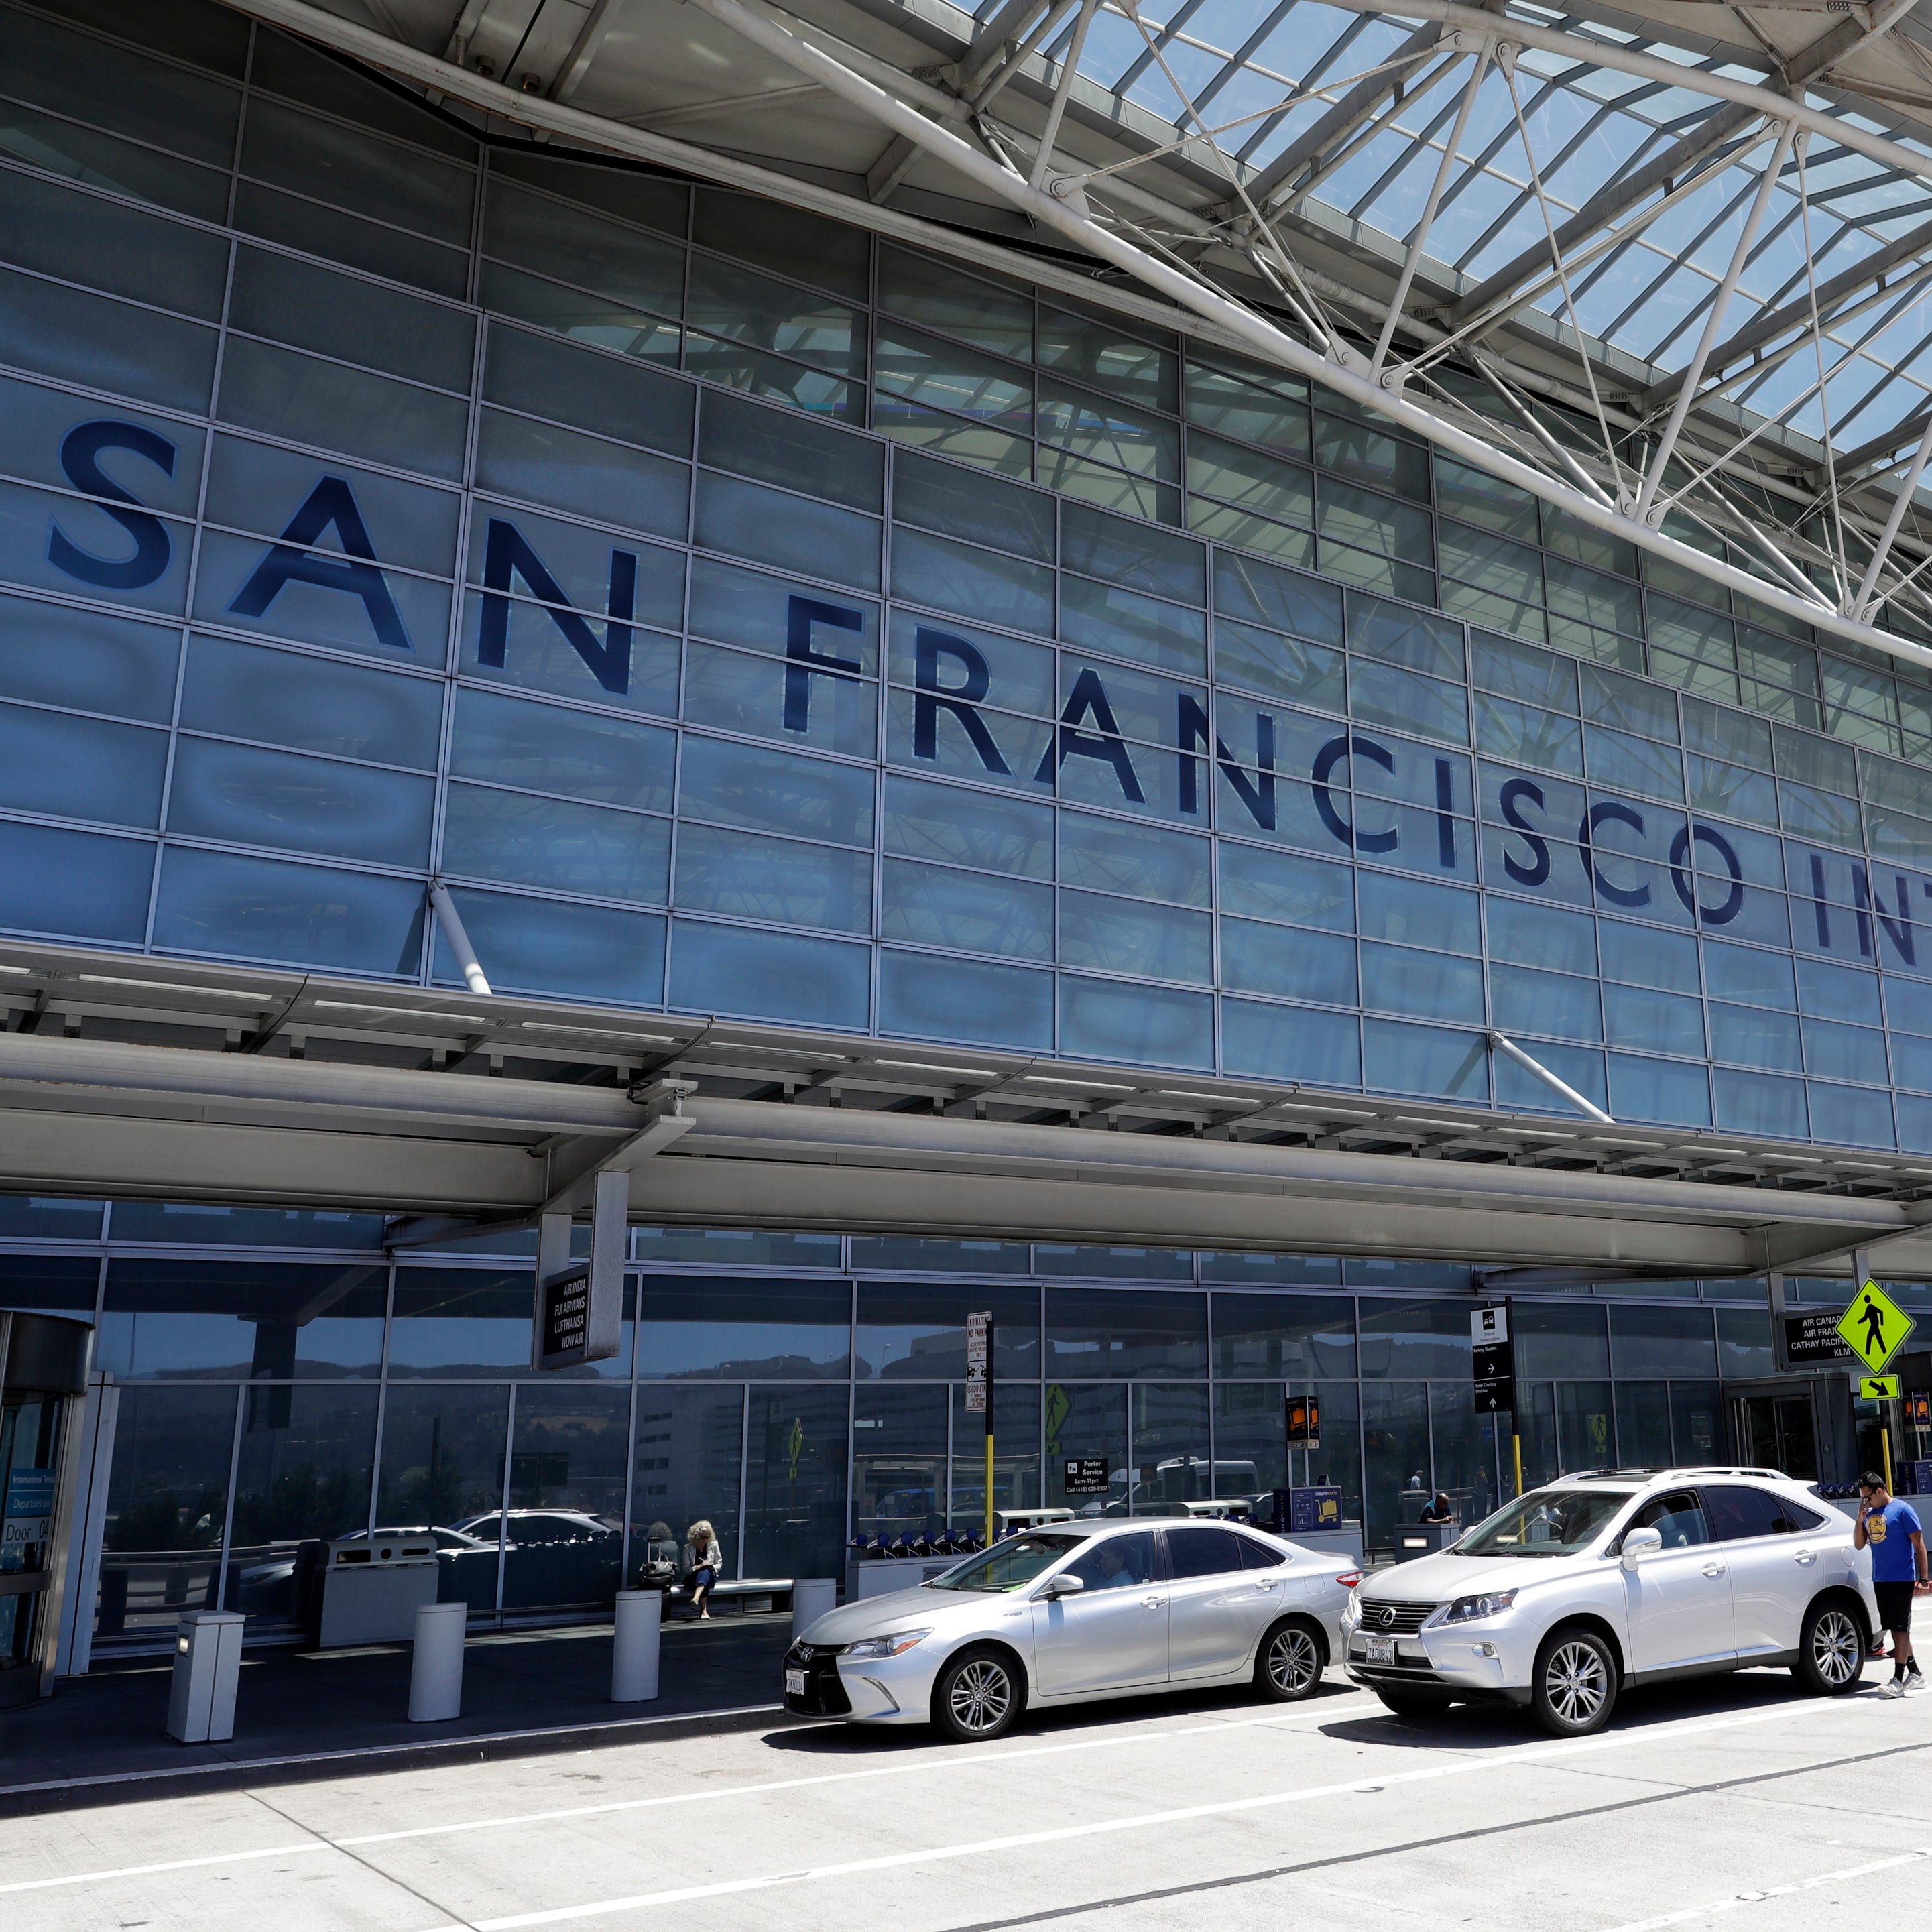 Vehicles wait outside the international terminal at San Francisco International Airport in San Francisco on July 11, 2017. Two airliners aborted landings at San Francisco International Airport on May 19, 2023, after pilots spotted a Southwest Airlines jet taxiing across runways on which the other planes had been cleared to land. The Federal Aviation Administration said Thursday, May 25, that it reviewed the matter and determined that appropriate steps were taken to ensure safety. (AP Photo/Marcio Jose   Sanchez, File)